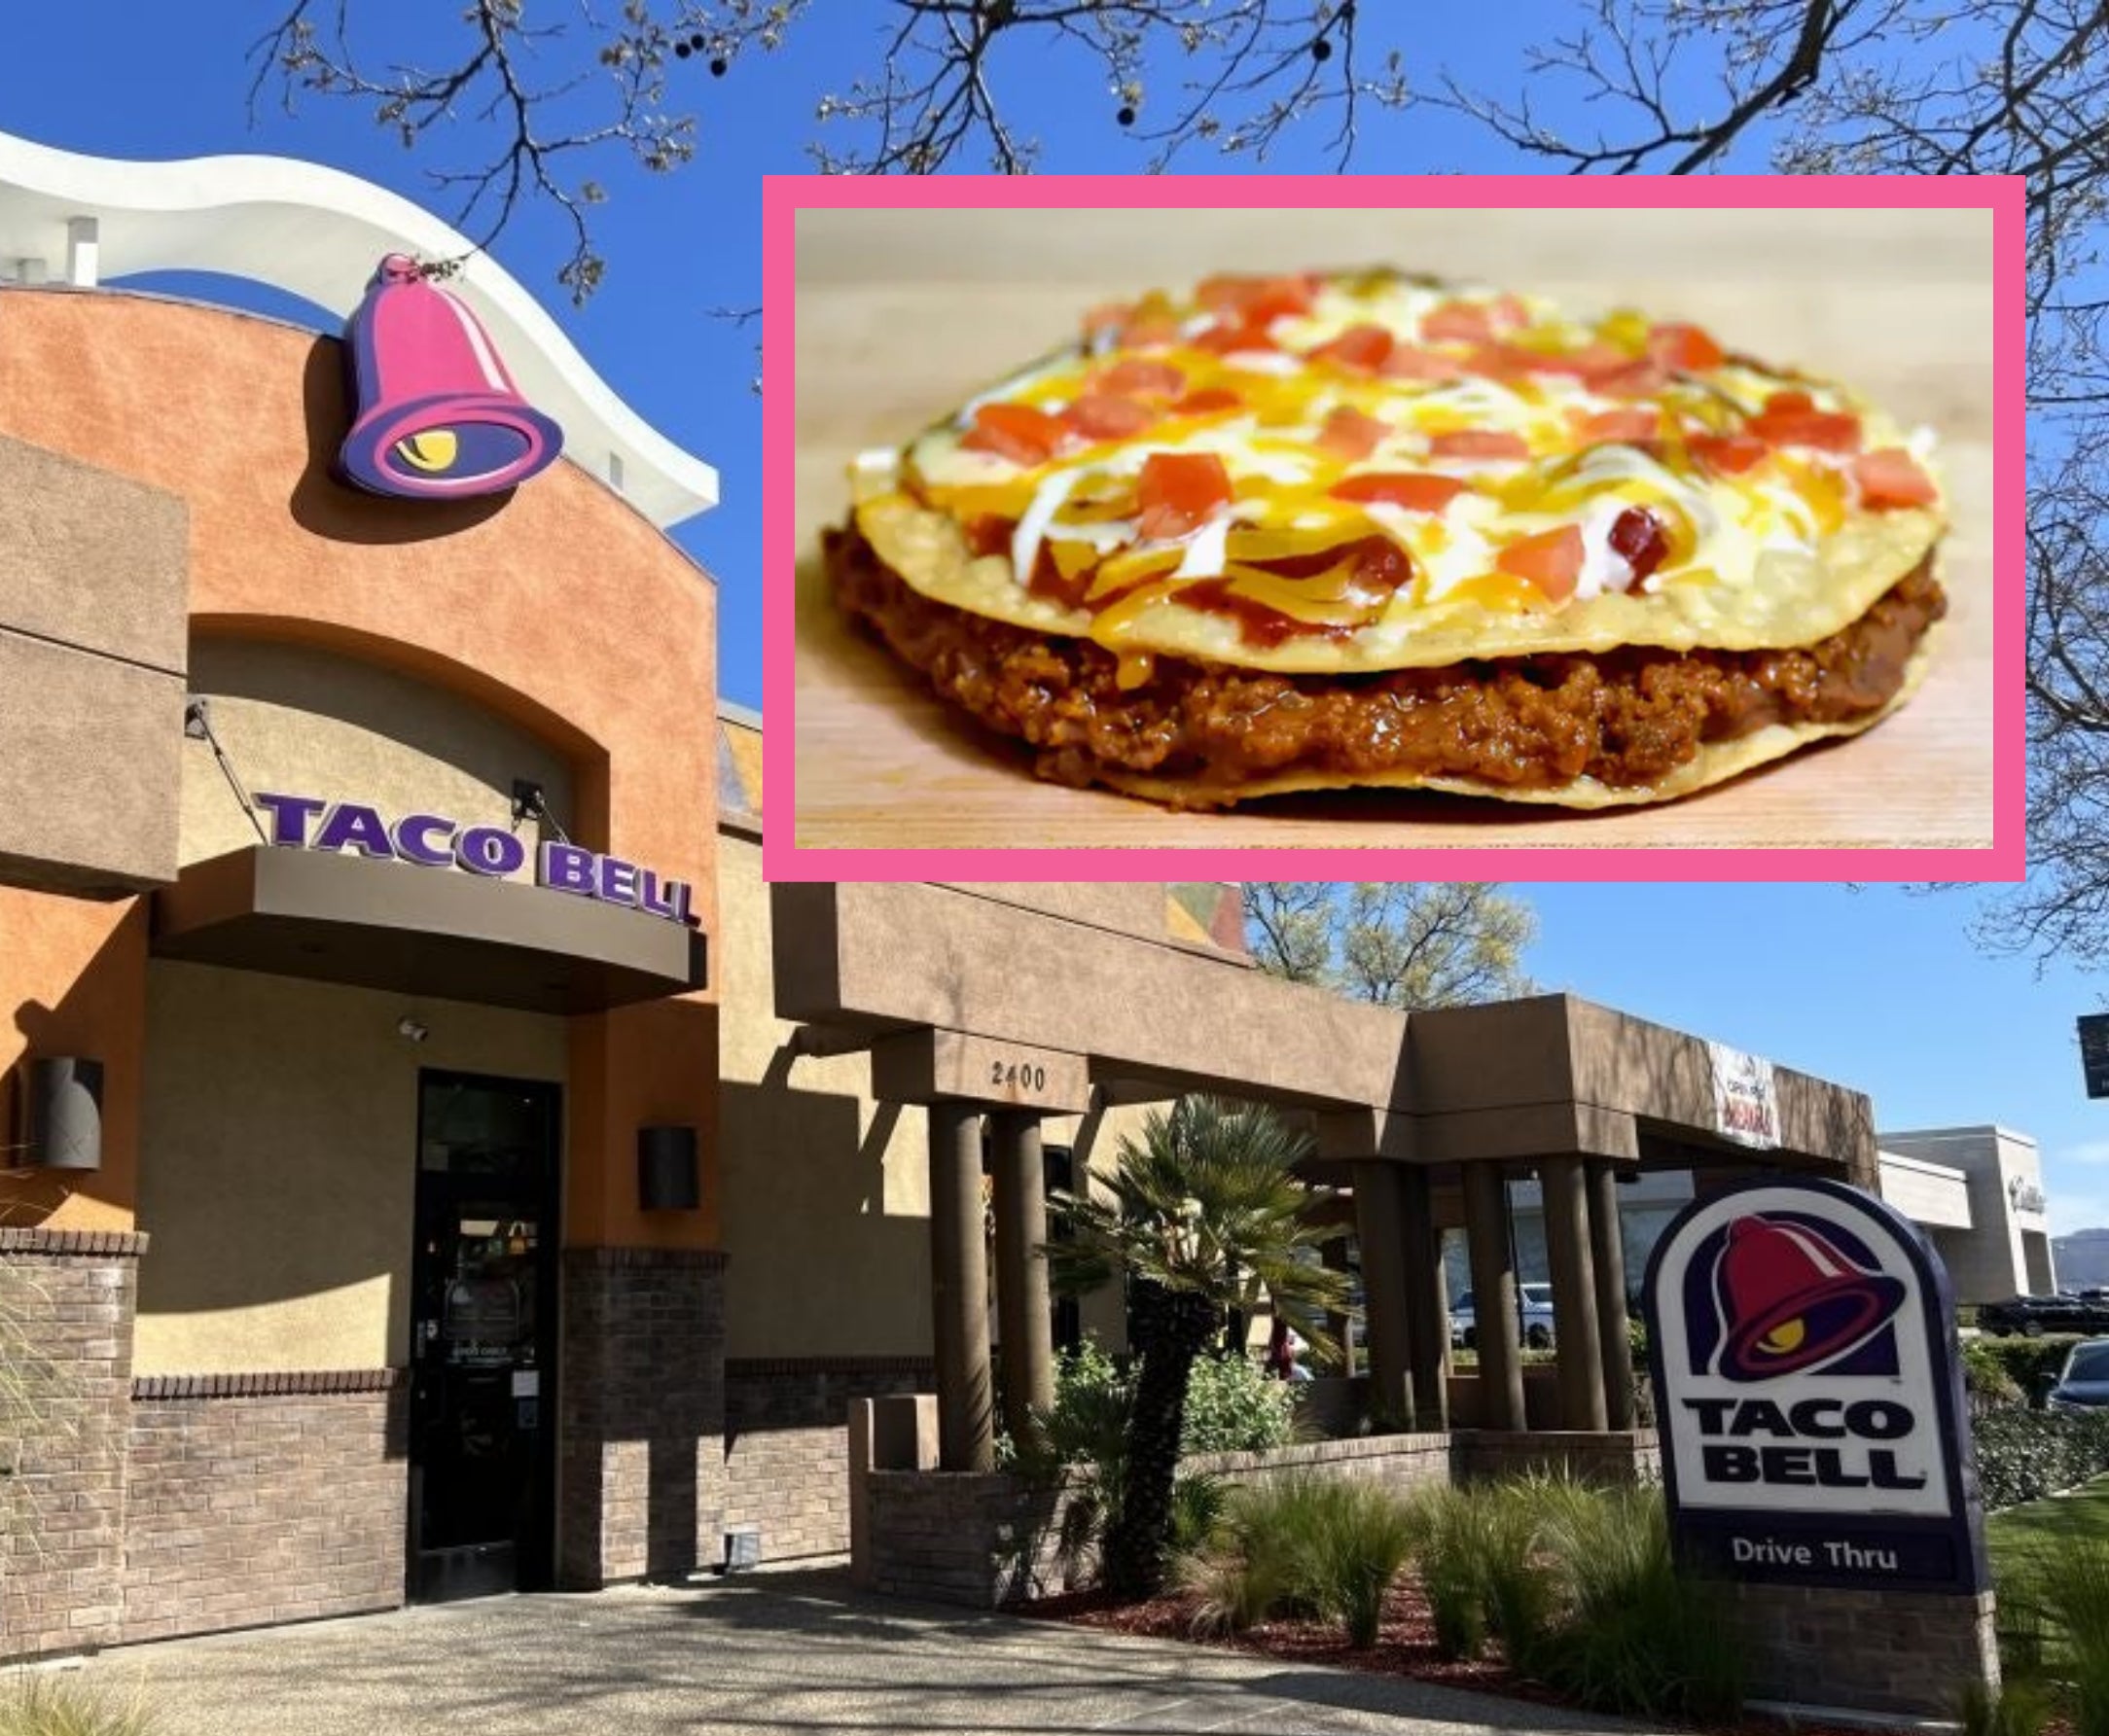 taco bell building with overlayed image of mexican pizza